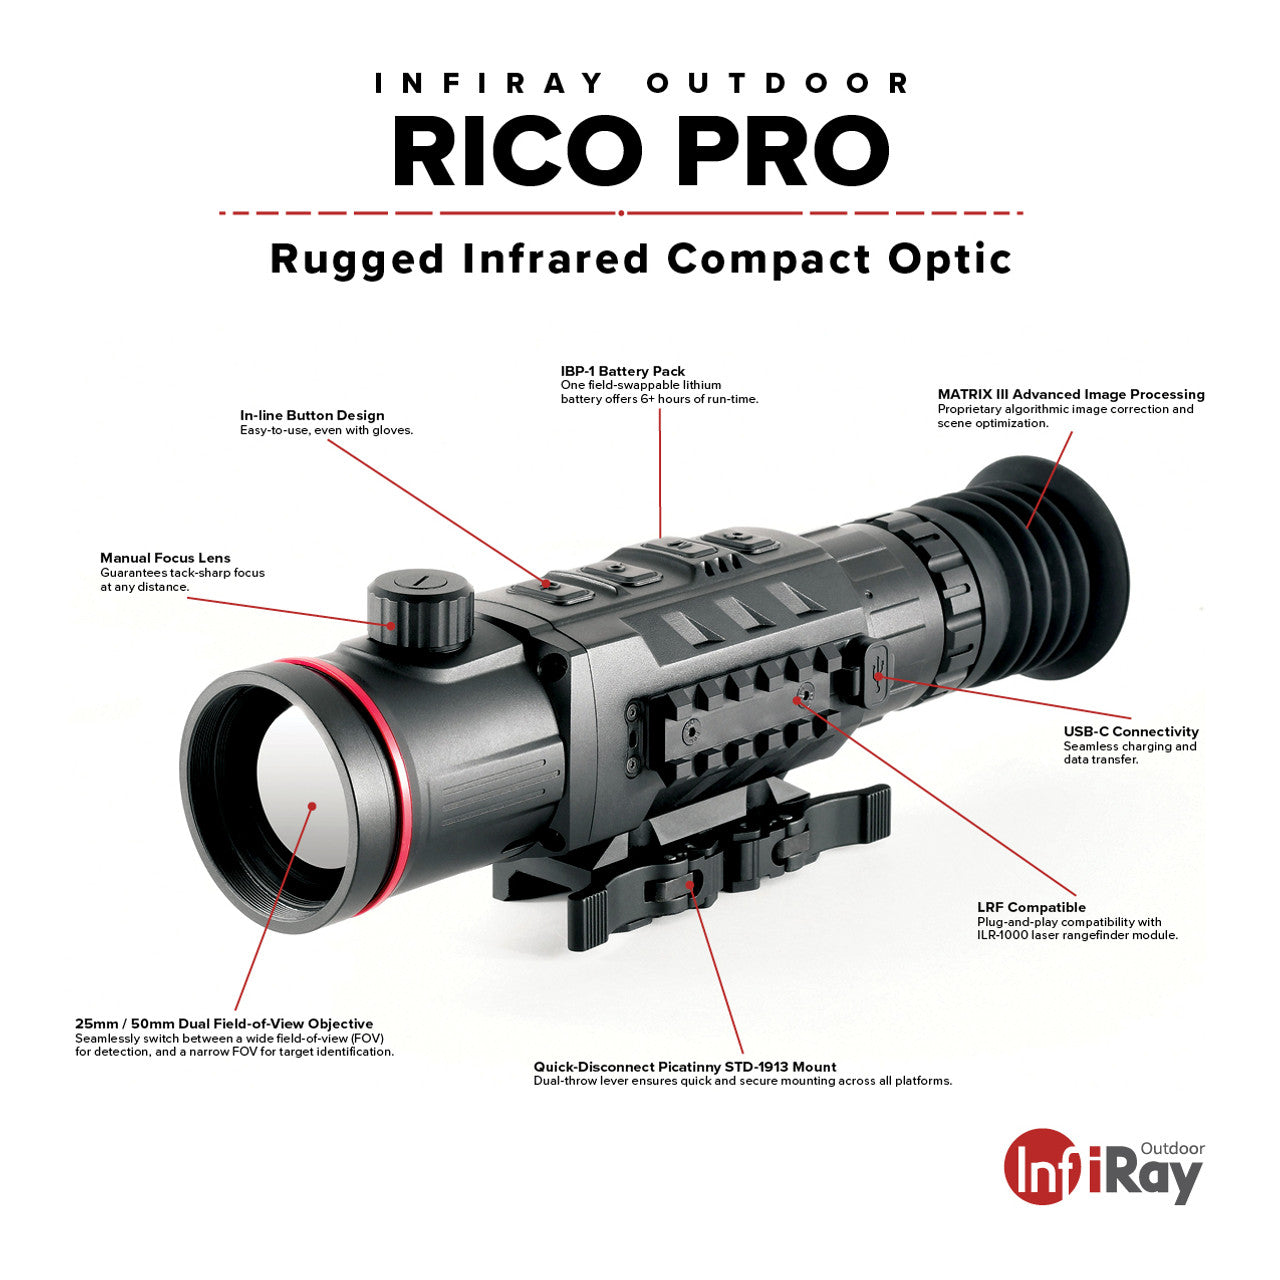 InfiRay Outdoor RICO PRO 640 Variable 25/50mm Thermal Scope